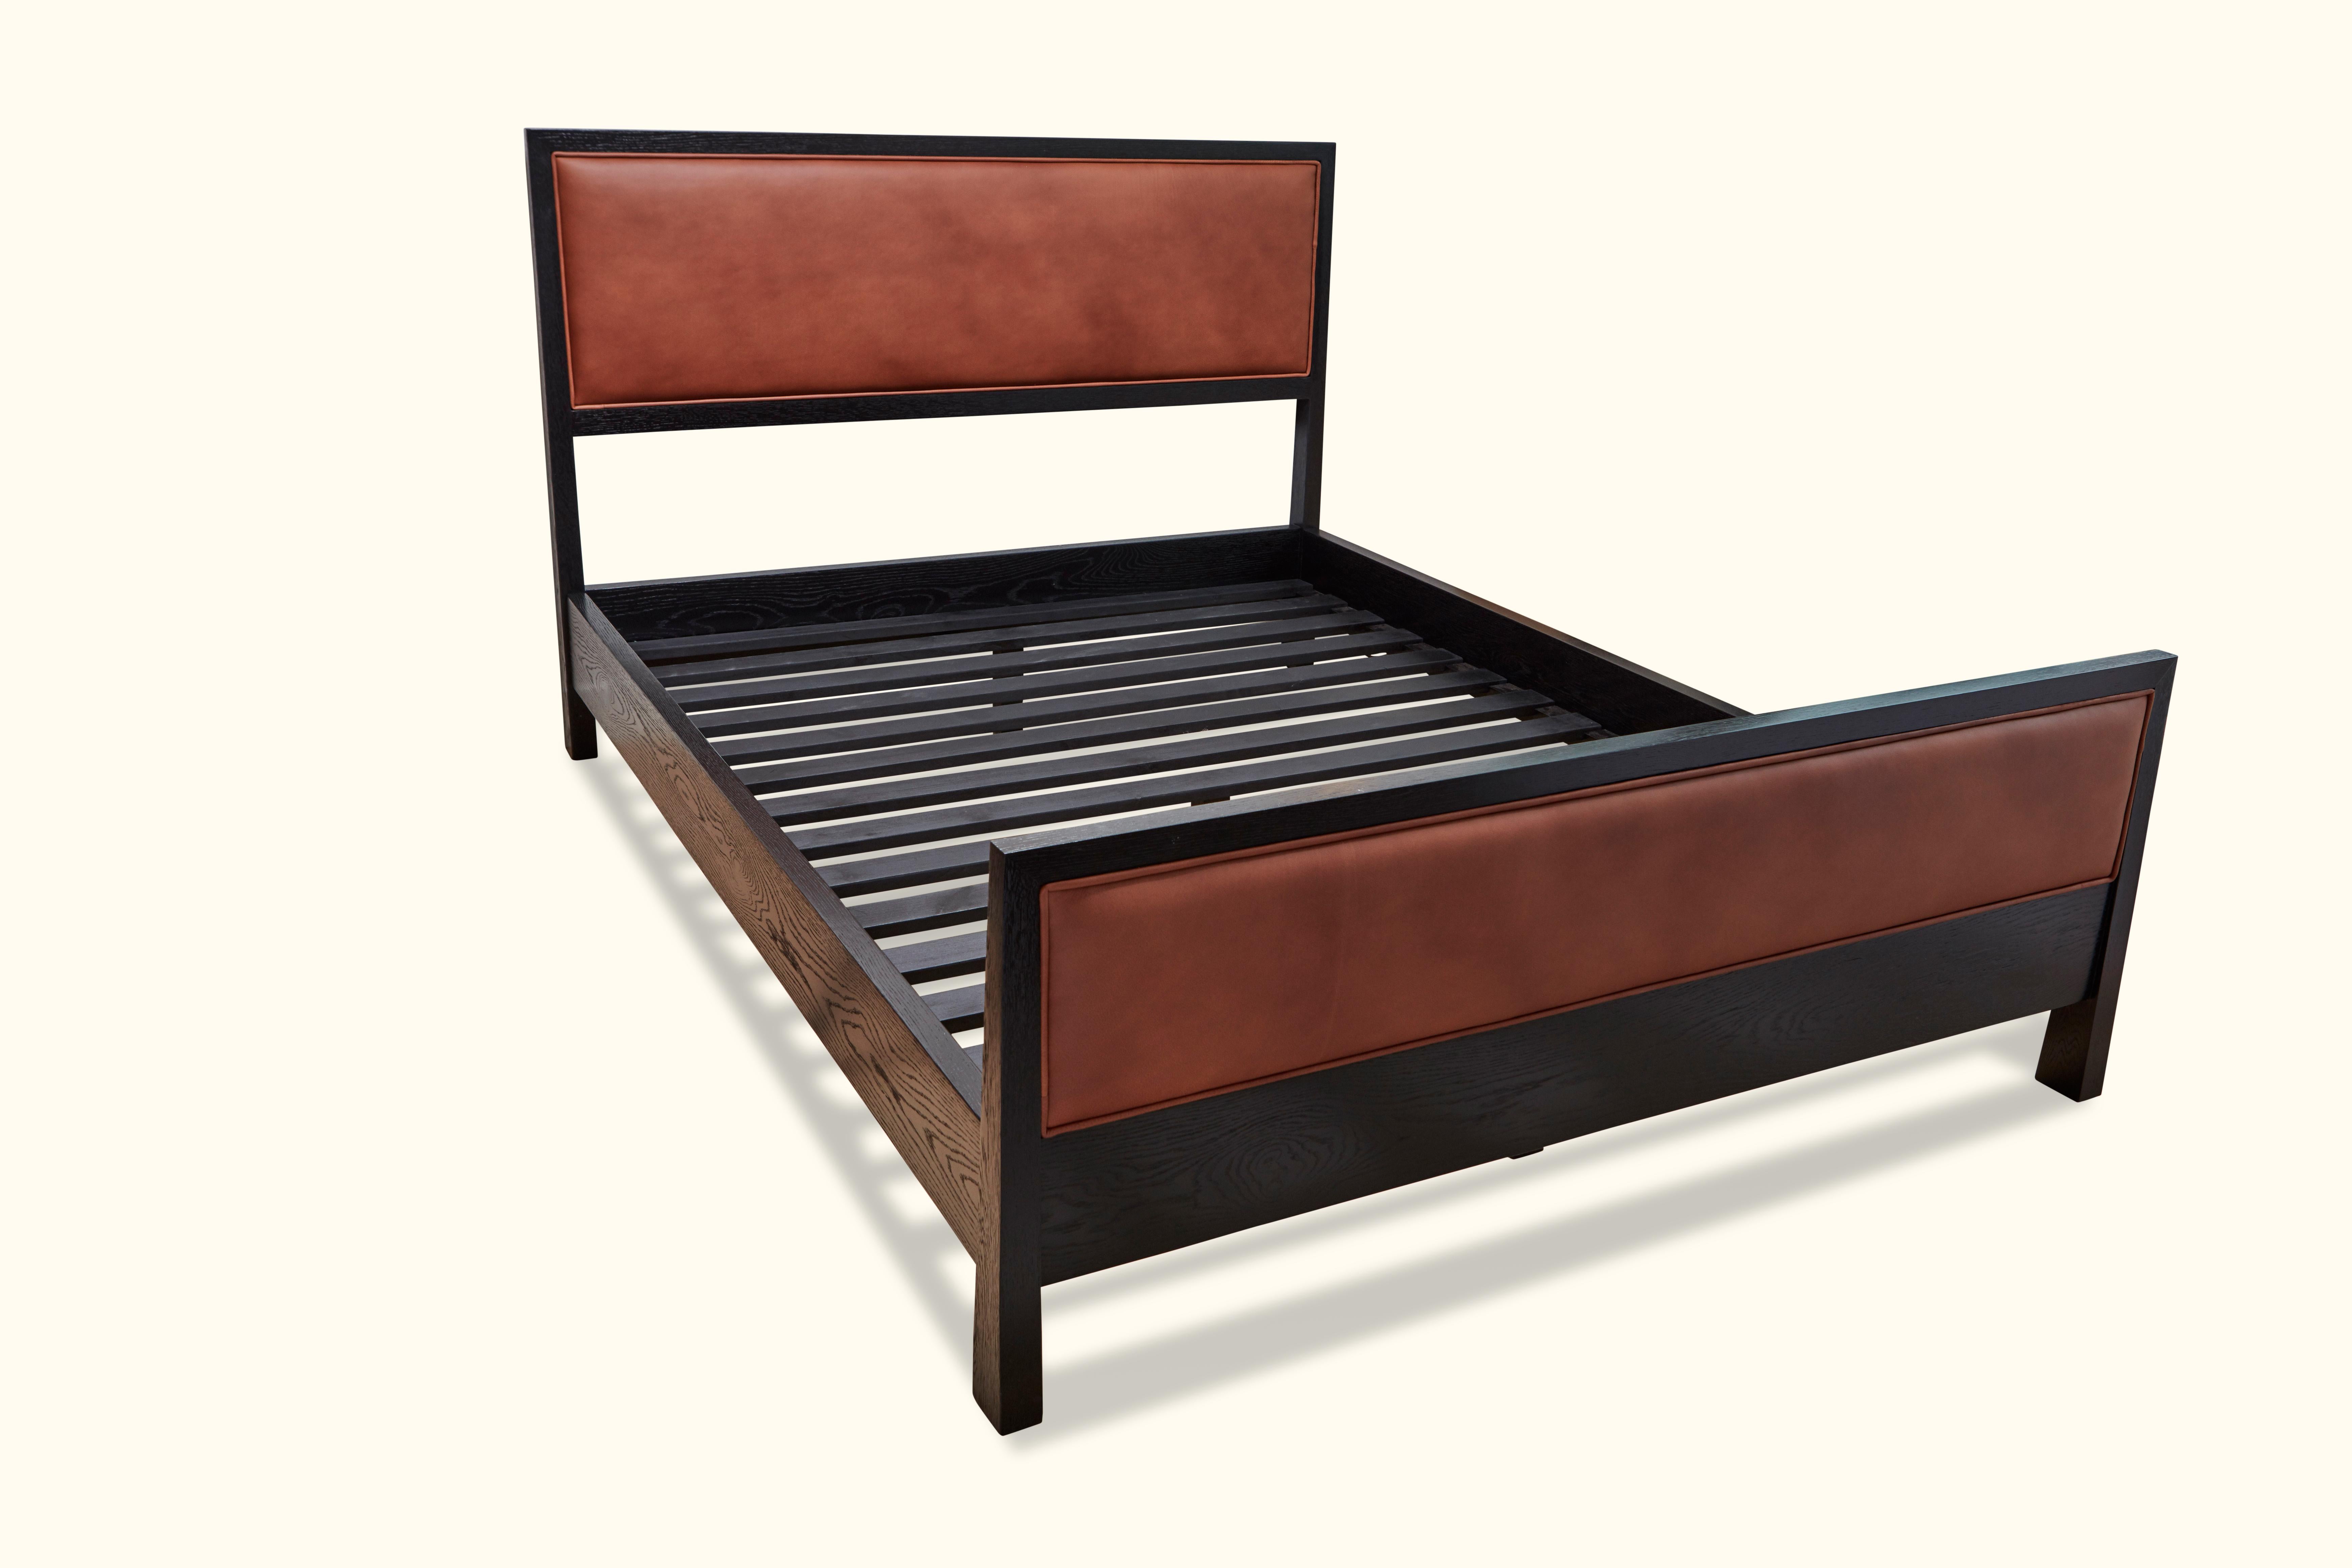 The Auden bed is a solid wood framed bed that can be made in either American walnut or white oak. The piece features an upholstered headboard and footboard. Slats are provided. Shown here in cognac leather and in ebonized oak. Queen size. 

The